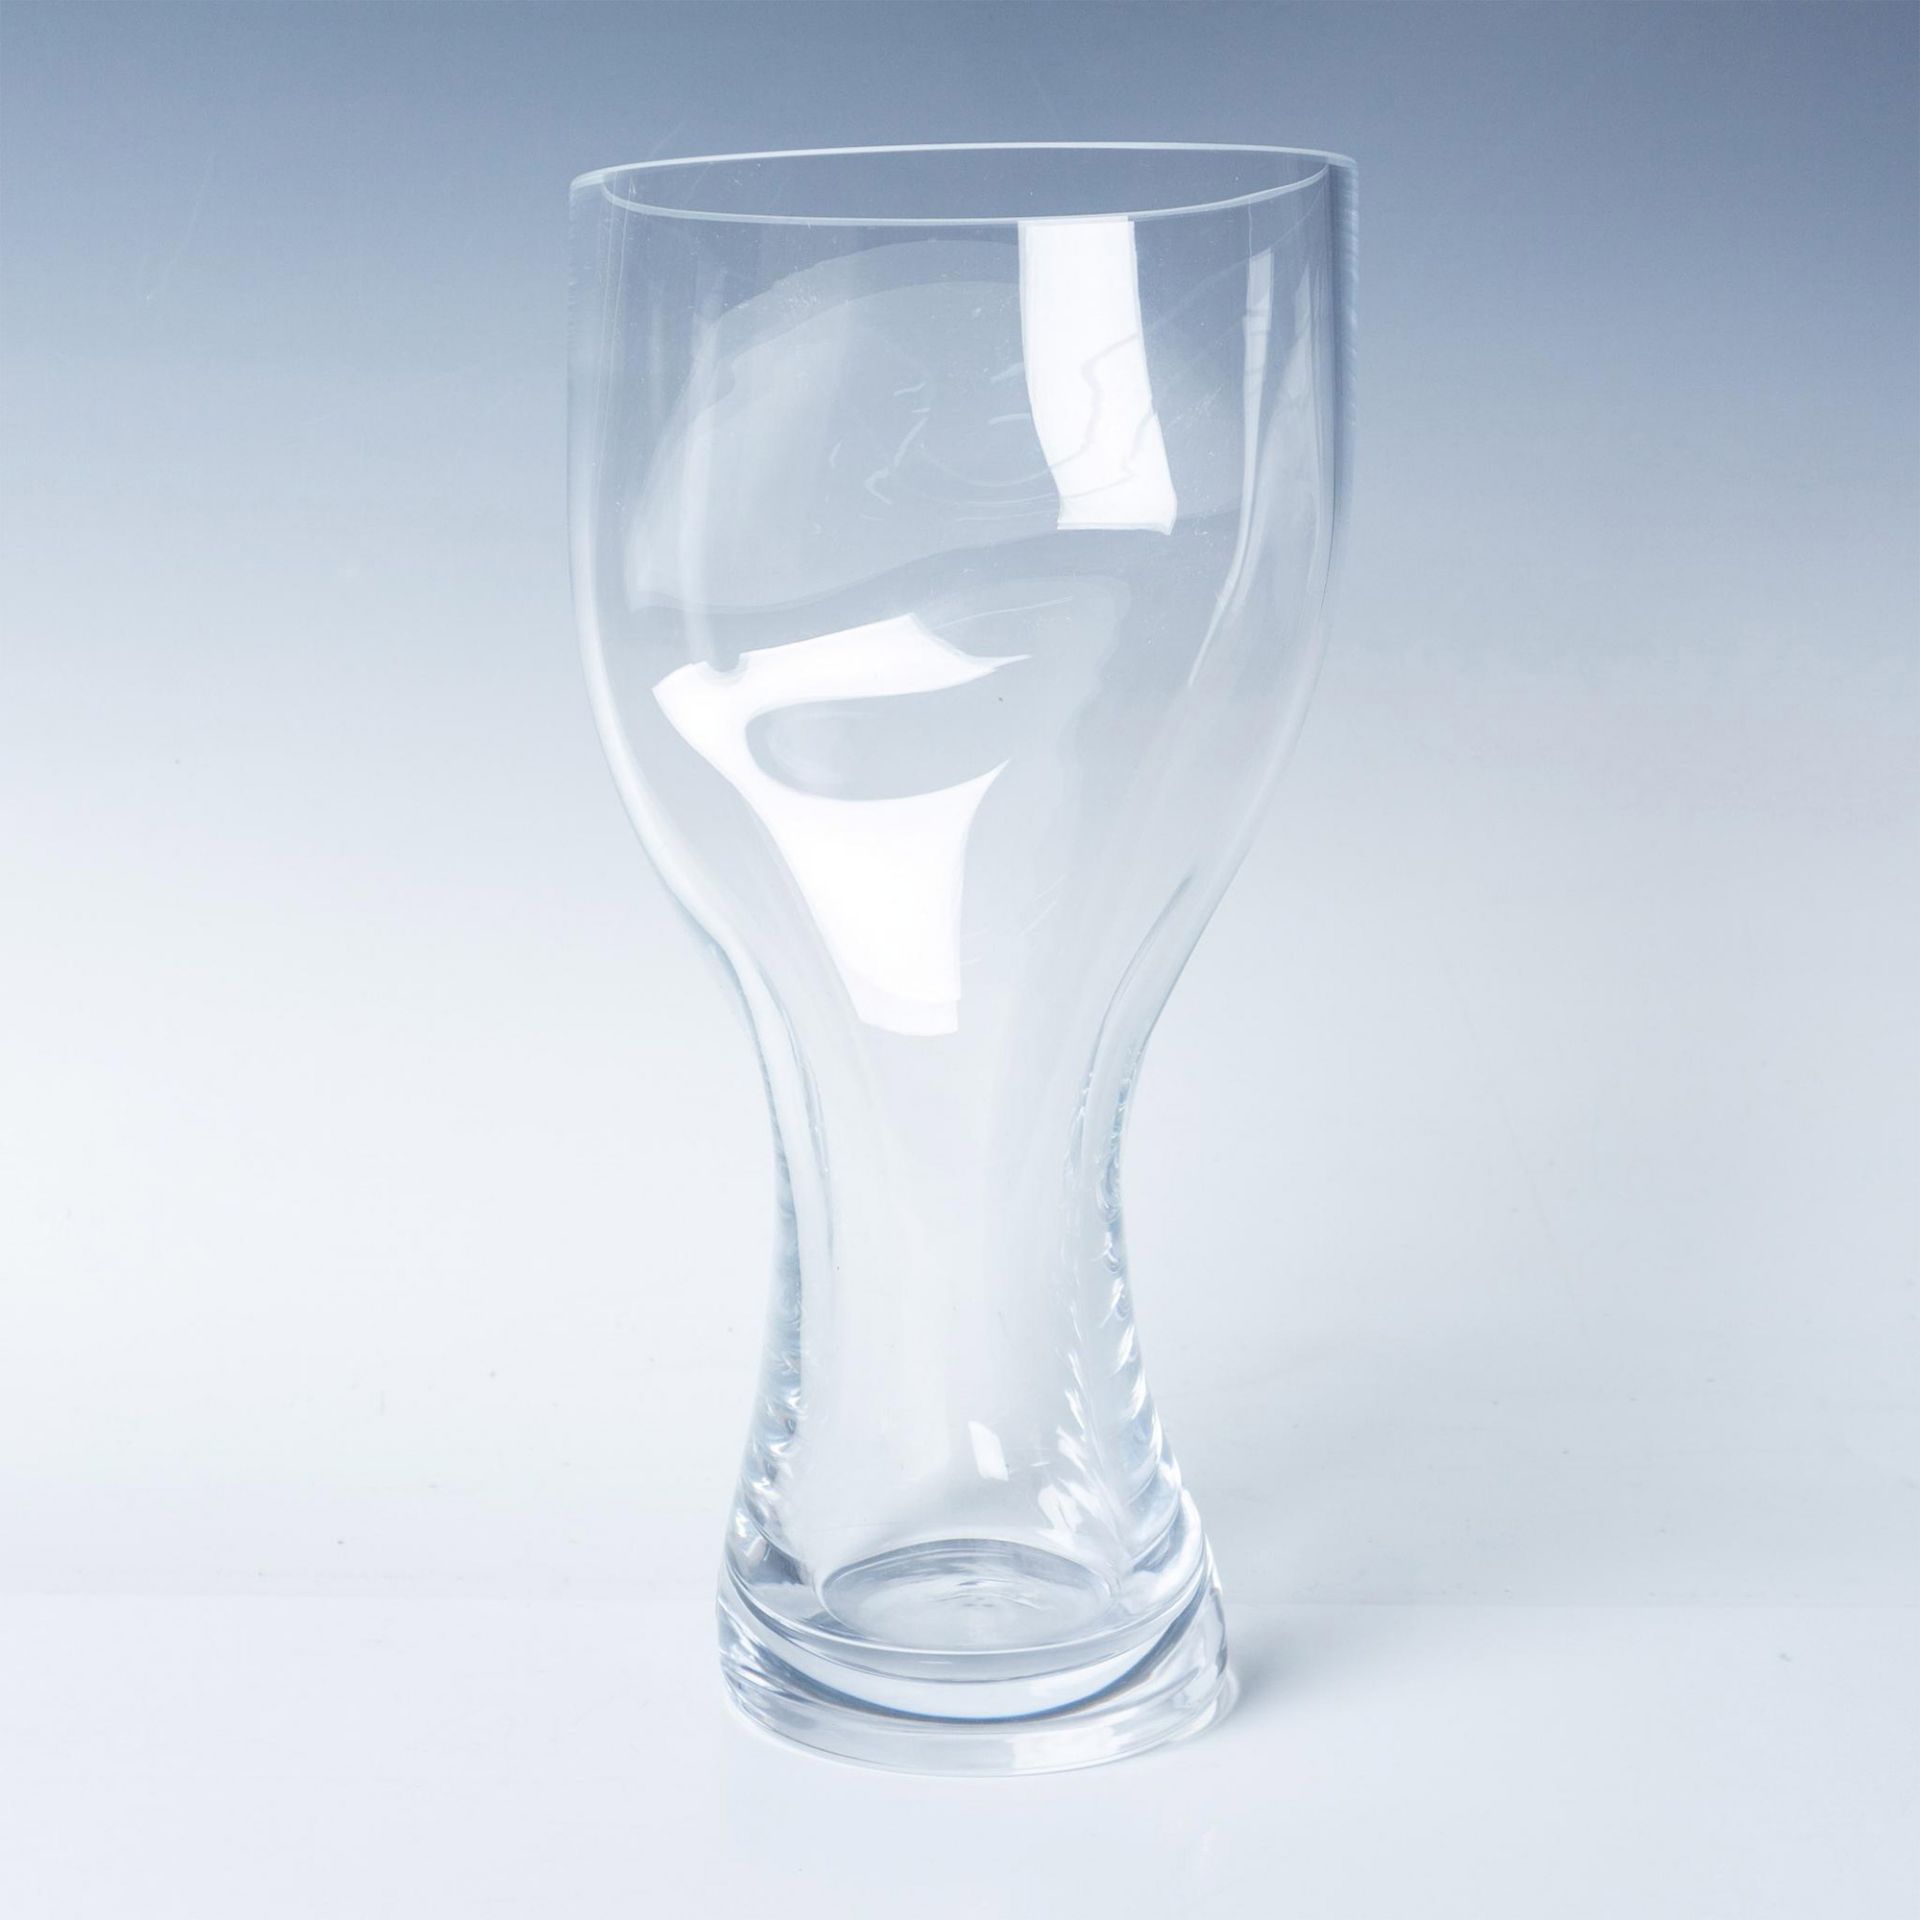 Orrefors Clear Crystal Vase, Squeeze Pattern - Image 2 of 4